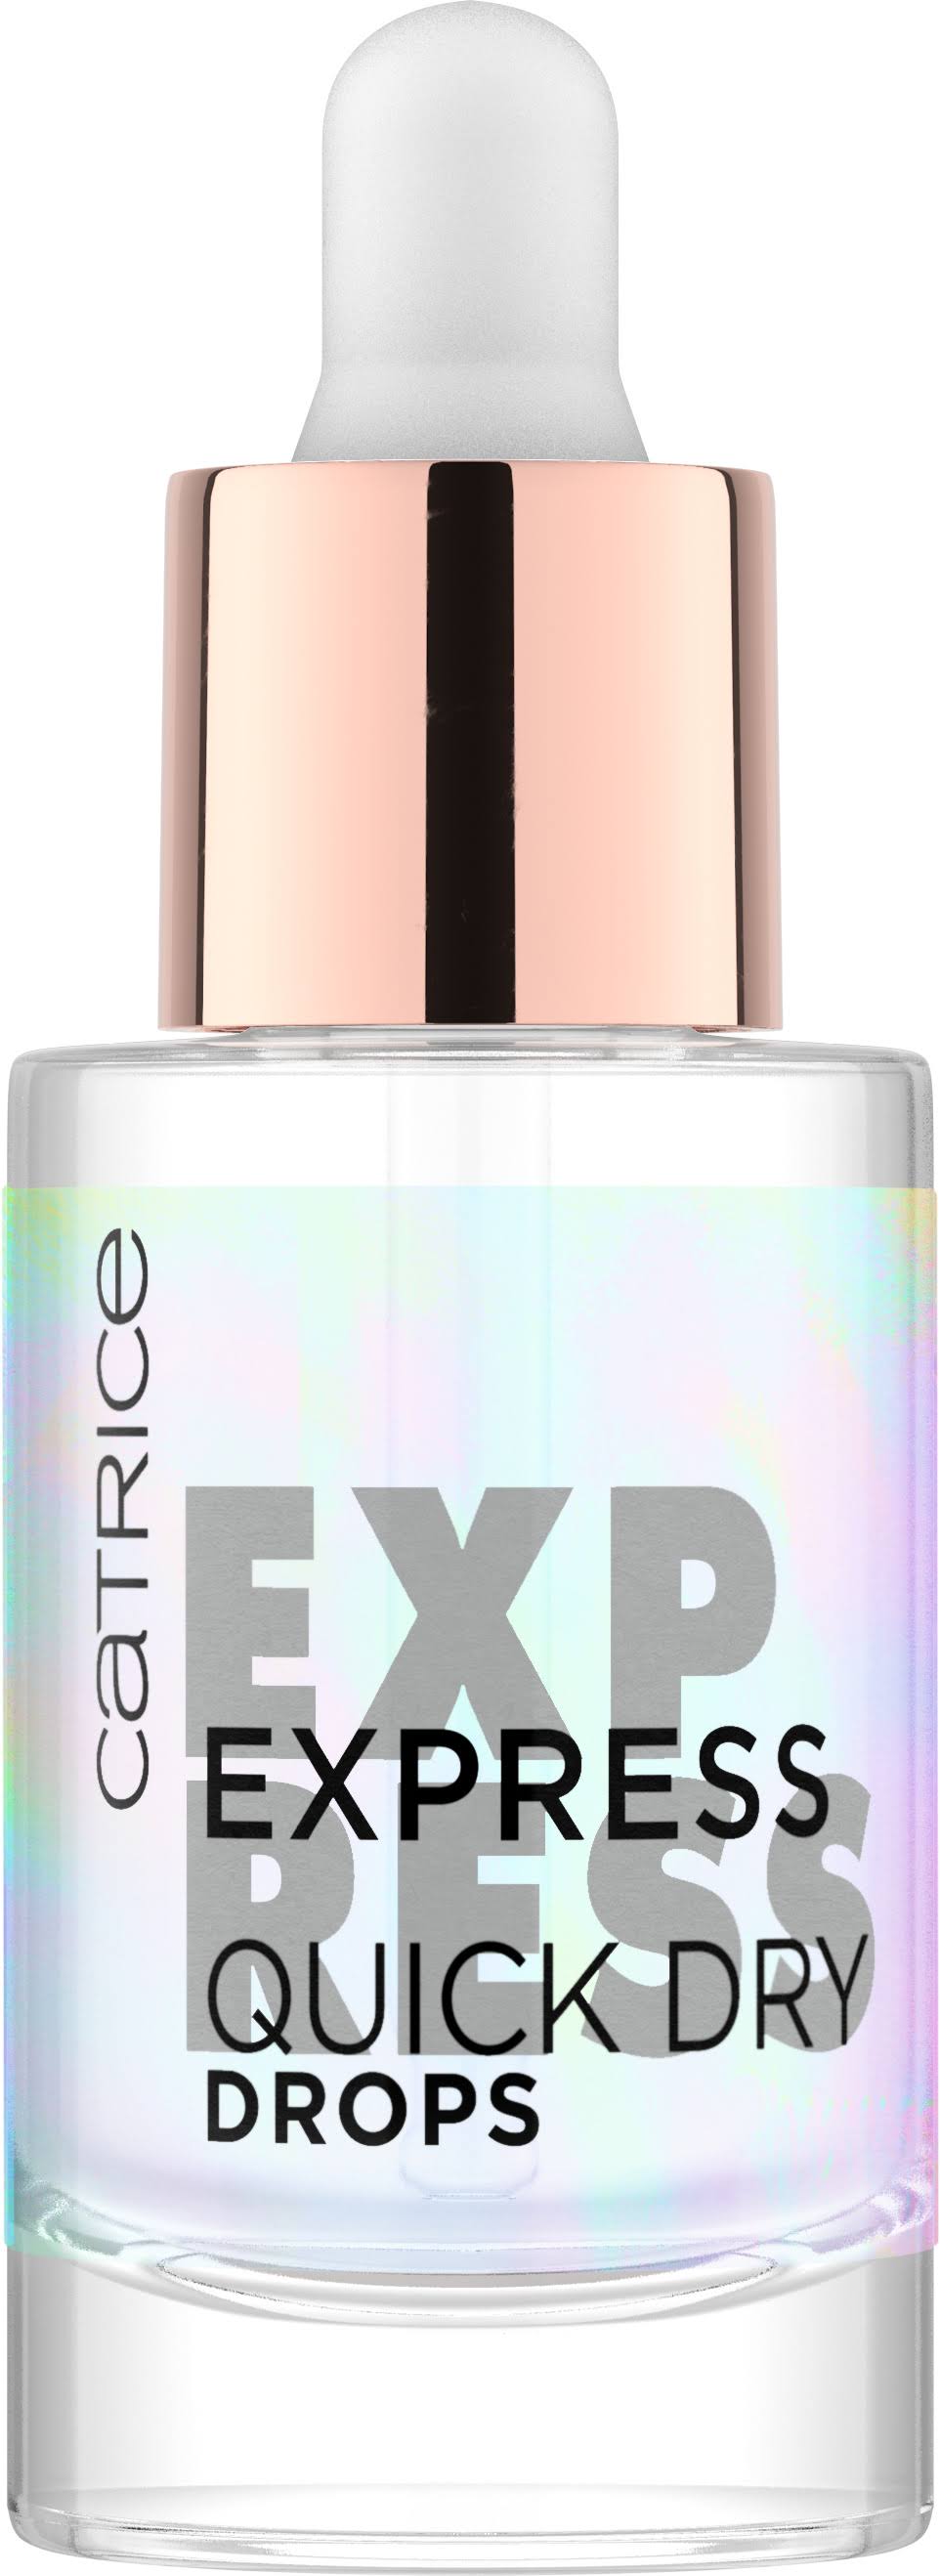 CATRICE EXPRESS quick dry drops 8 ml